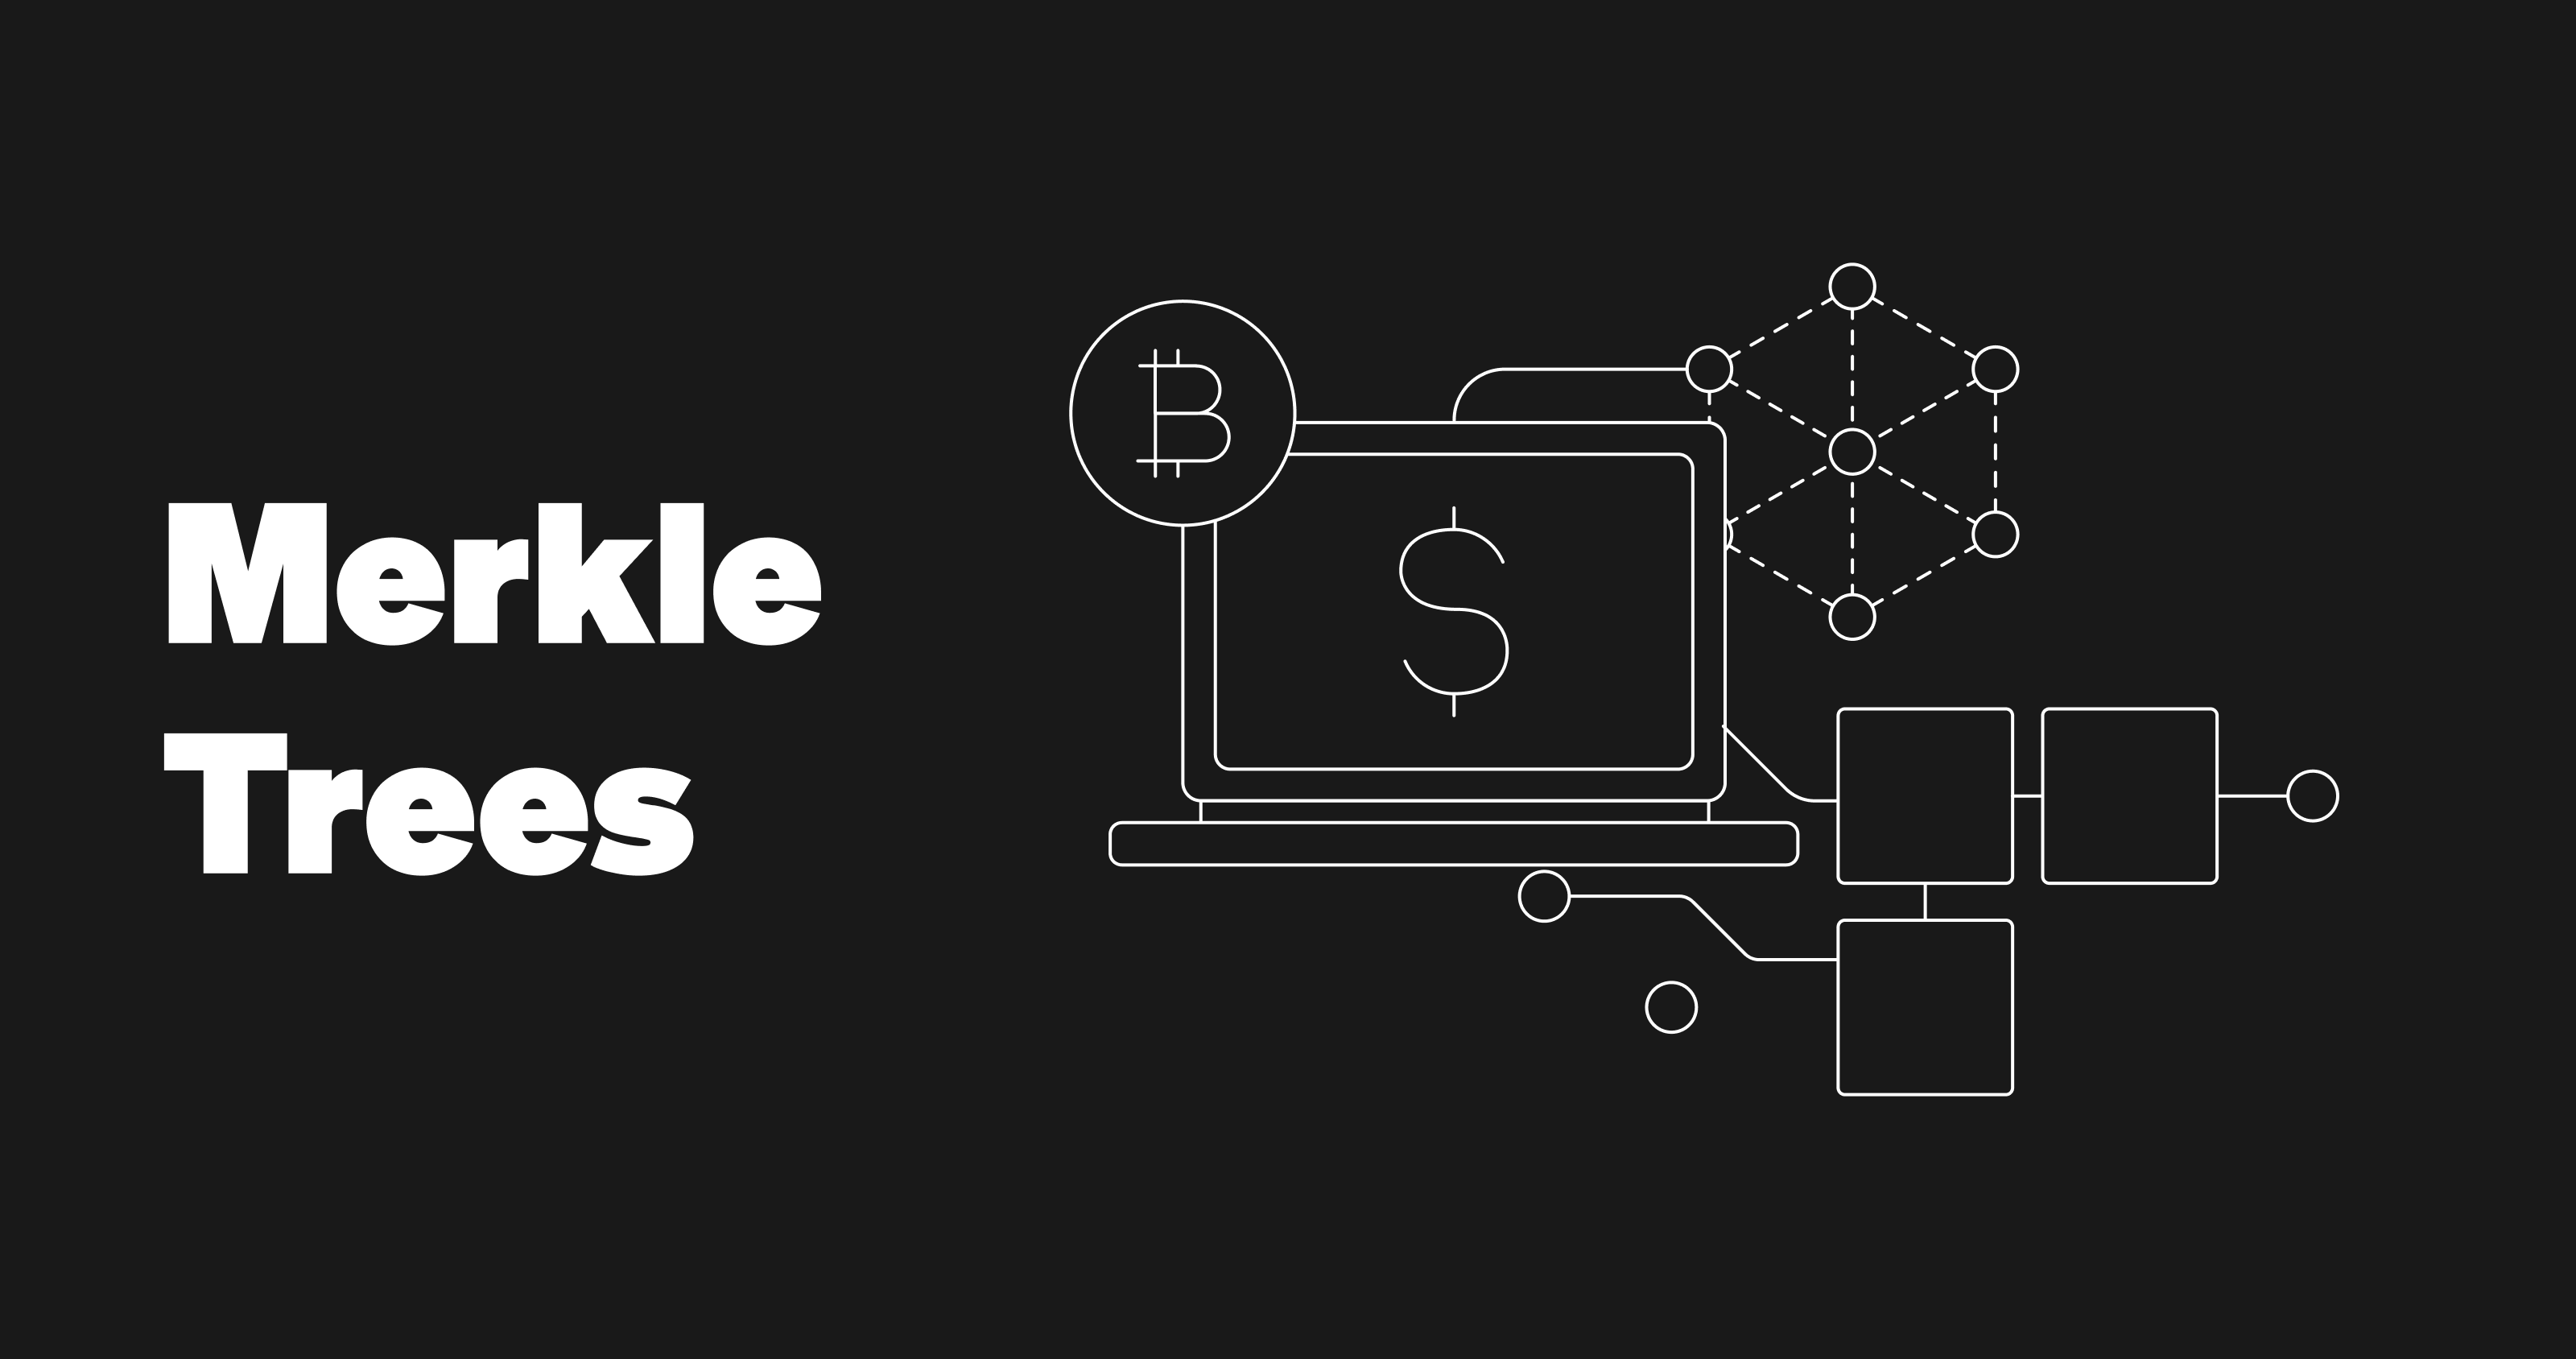 What are Merkle Trees and how do they enable Proof of Reserves?